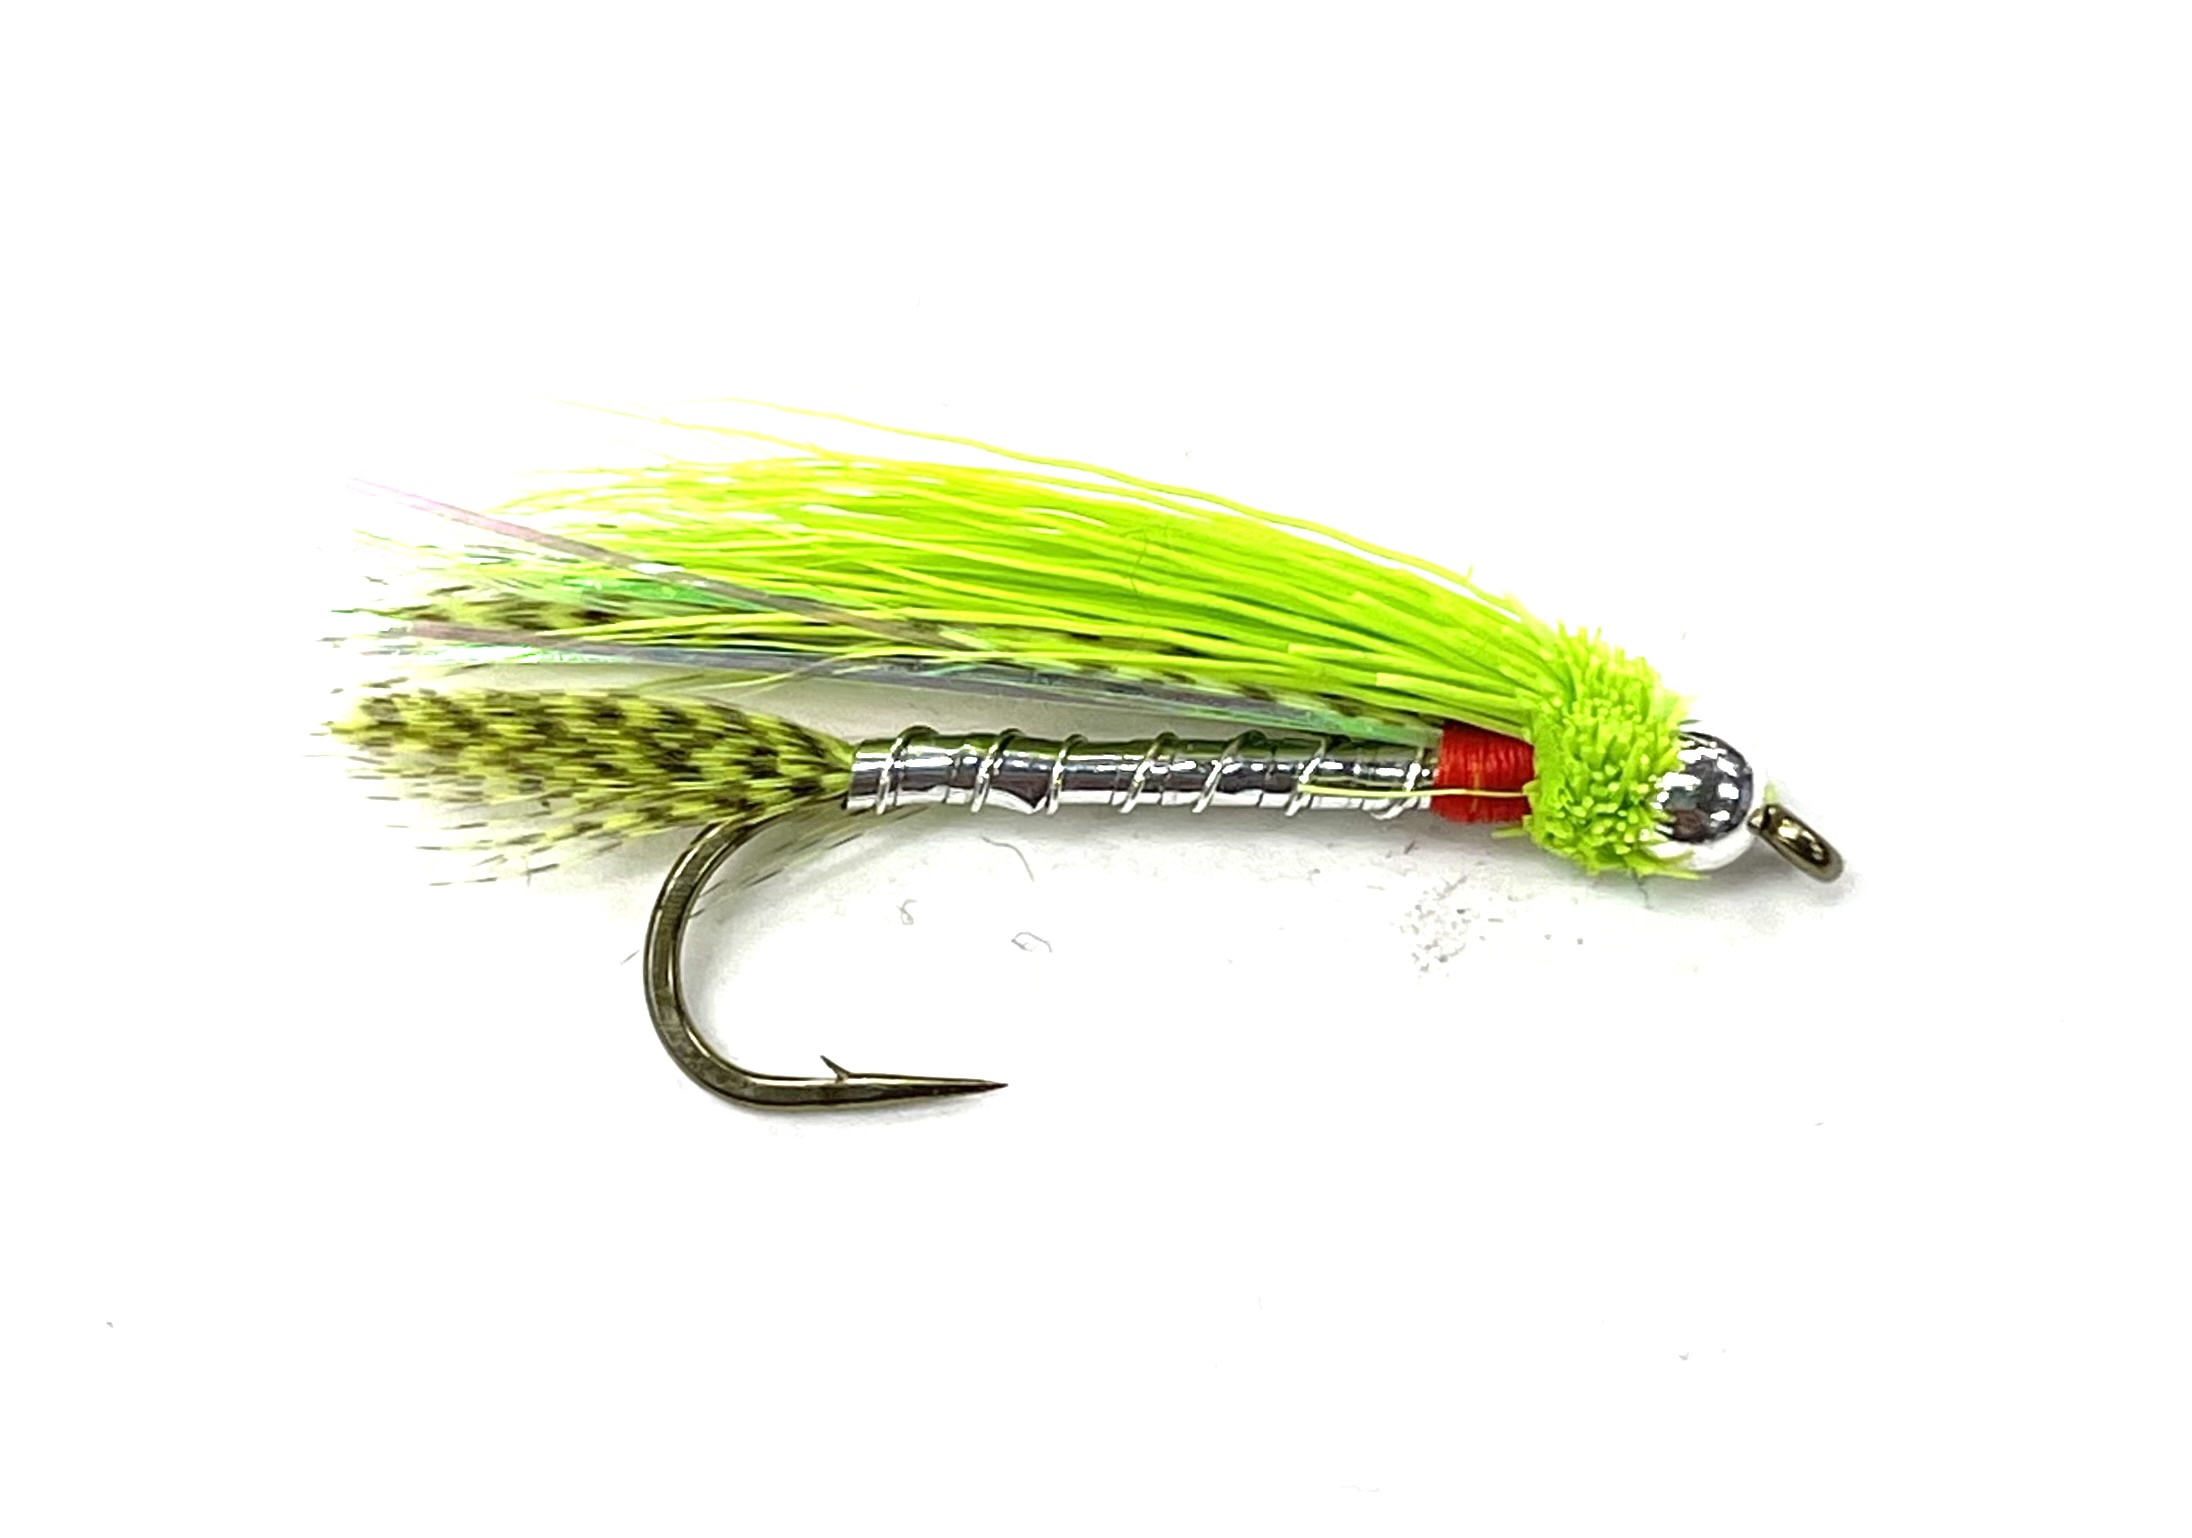 FAD Bead Head Silver Rolled Muddler - Fl. Chartreuse - Size 8